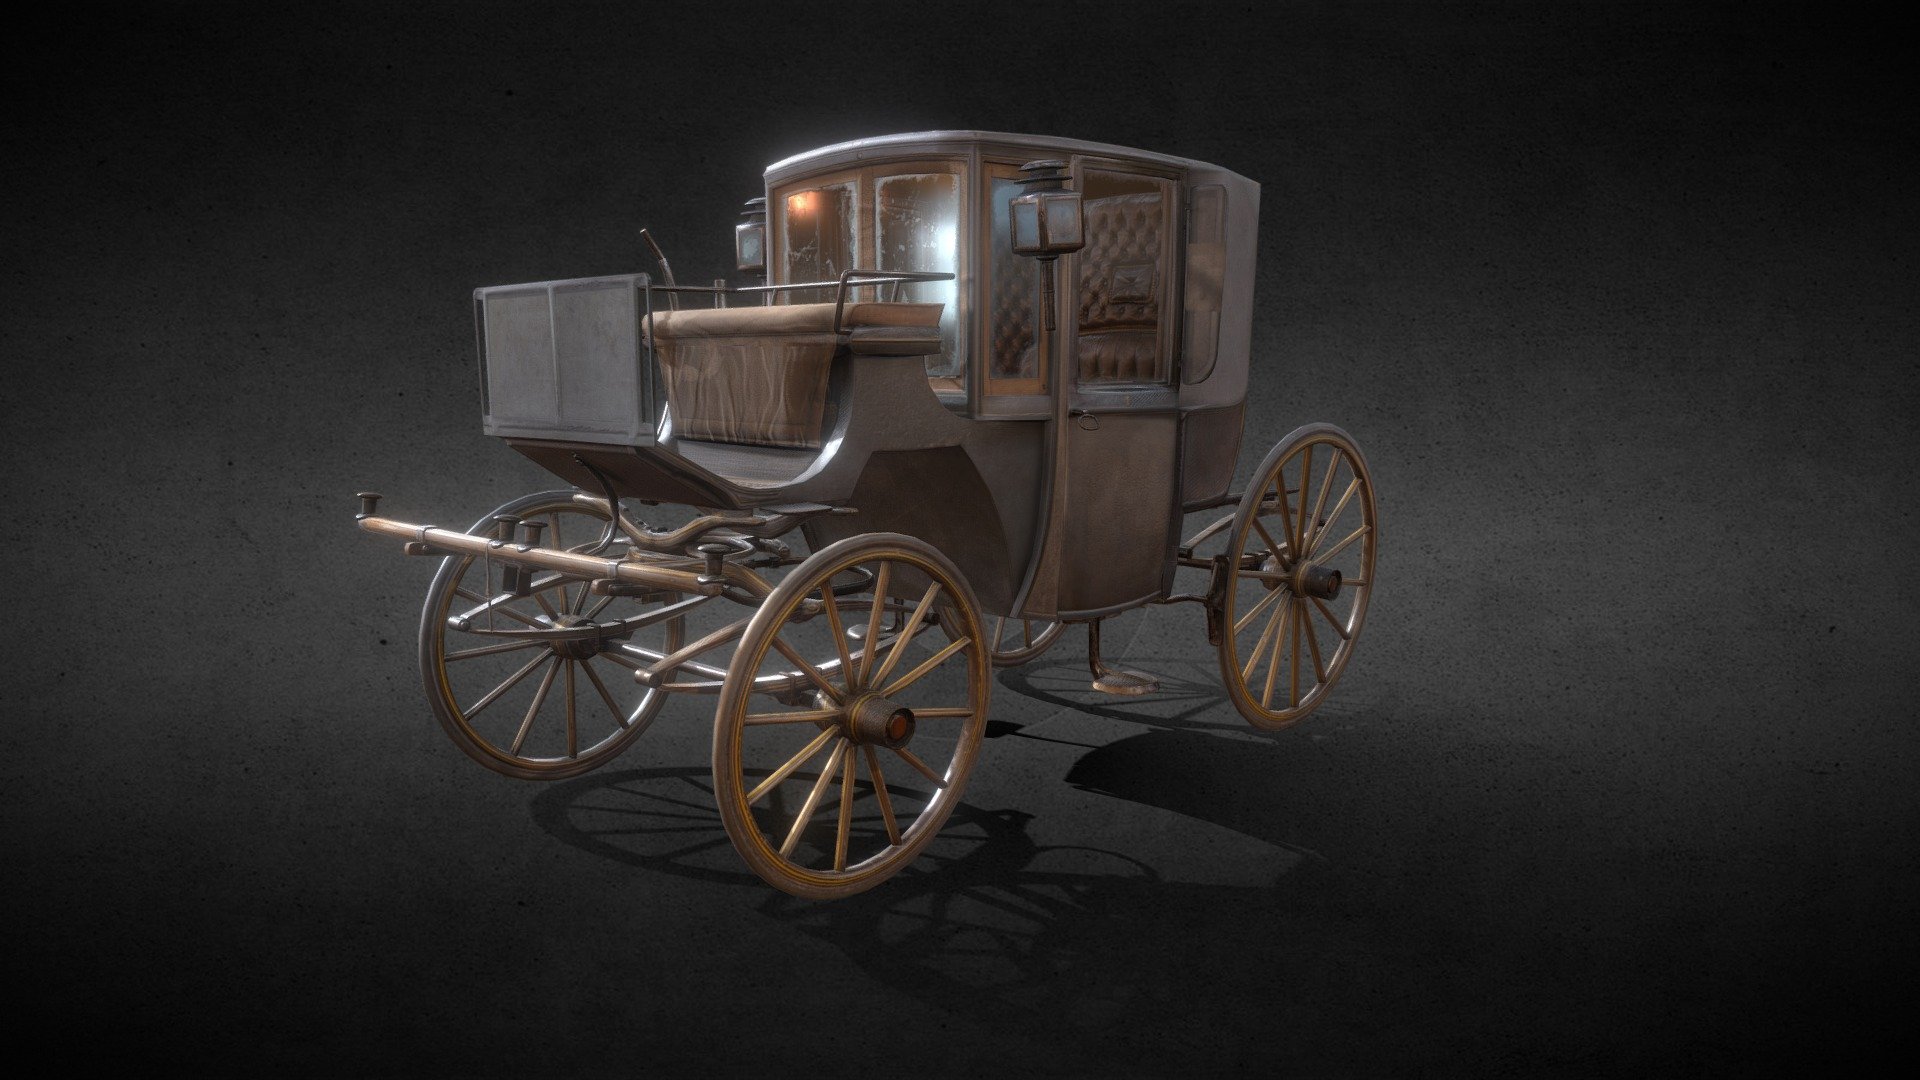 Double Brougham carriage scan performed in coordination with the Arlington Court Carriage Museum.

The first Brougham carriage was commissioned in 1837 by Lord Brougham (1778-1868).  He wanted a refined and glorified street cab, which would make a convenient carriage for a gentleman…closed and intimate thus allowing the occupants to conduct a private conversation.

The Brougham, pronounced broom, became popular with the gentry of the day, as it was an ideal carriage for use in towns and cities. 

This carriage was built as a wedding present for Colonel F.M. Hext of Pinhoe, near Exeter. It was used during his honeymoon on the Isle of Wight and has the family crest on the door.

Double Broughams differ from Single Broughams in that they have fixed seating for four passengers and are usually extended at the front with small side windows.

This carriage was built in 1893 by W.Cole and Sons of Kensington, London. It was given to the National Trust in 1982 3d model